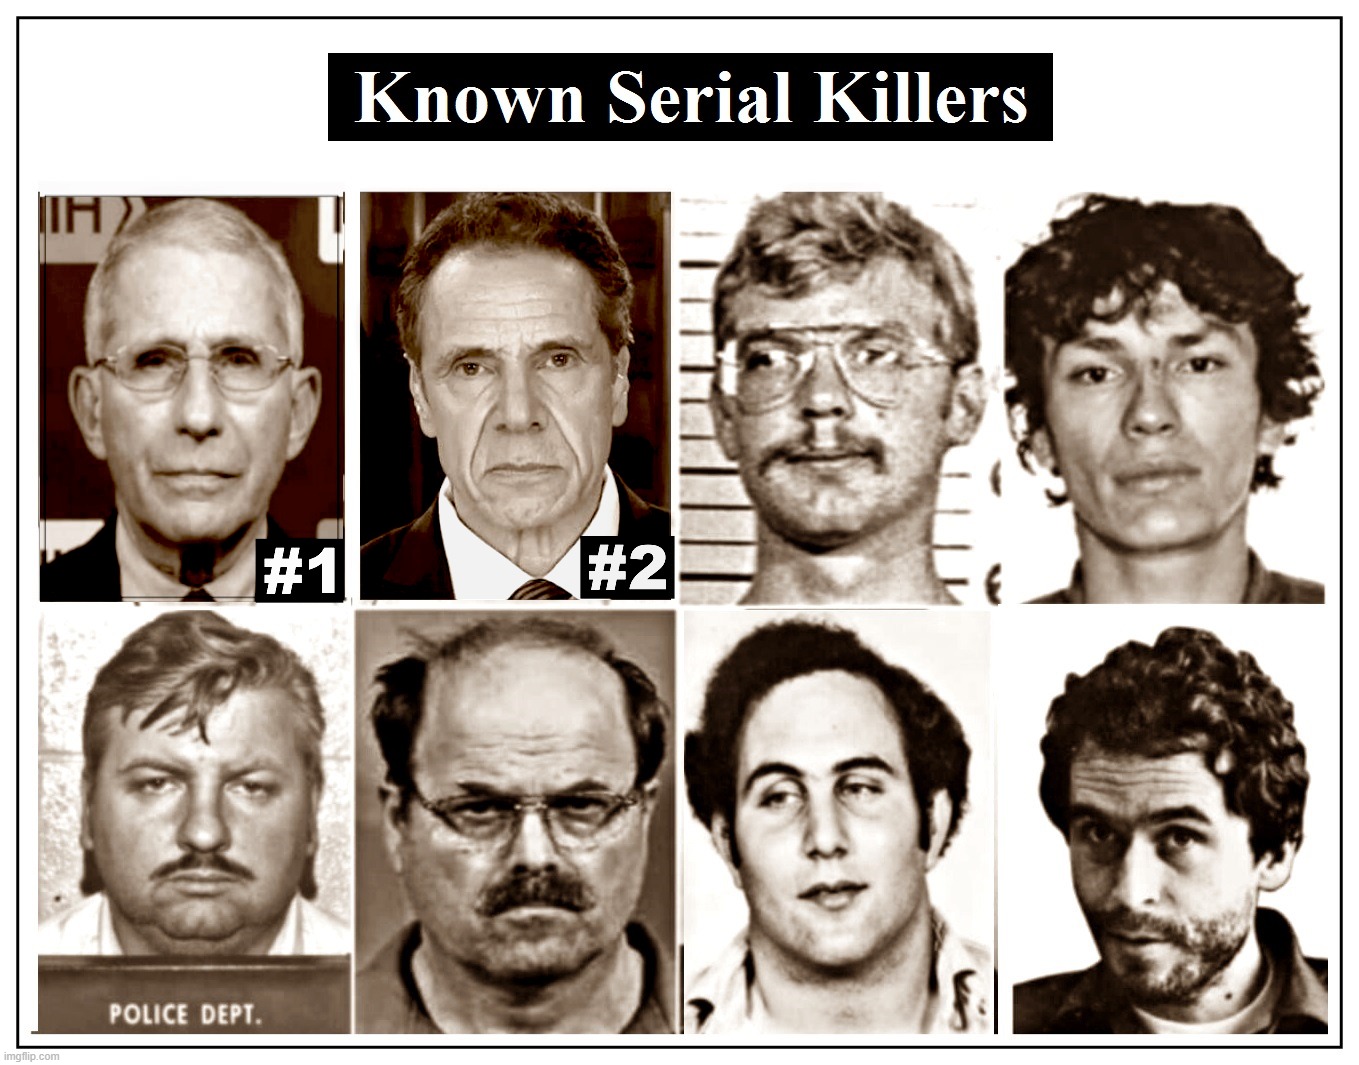 At least the Nightstalker would see the faces of his victims | image tagged in serial killer,fauci,cuomo,cuomosexual,covid killers,elderly | made w/ Imgflip meme maker